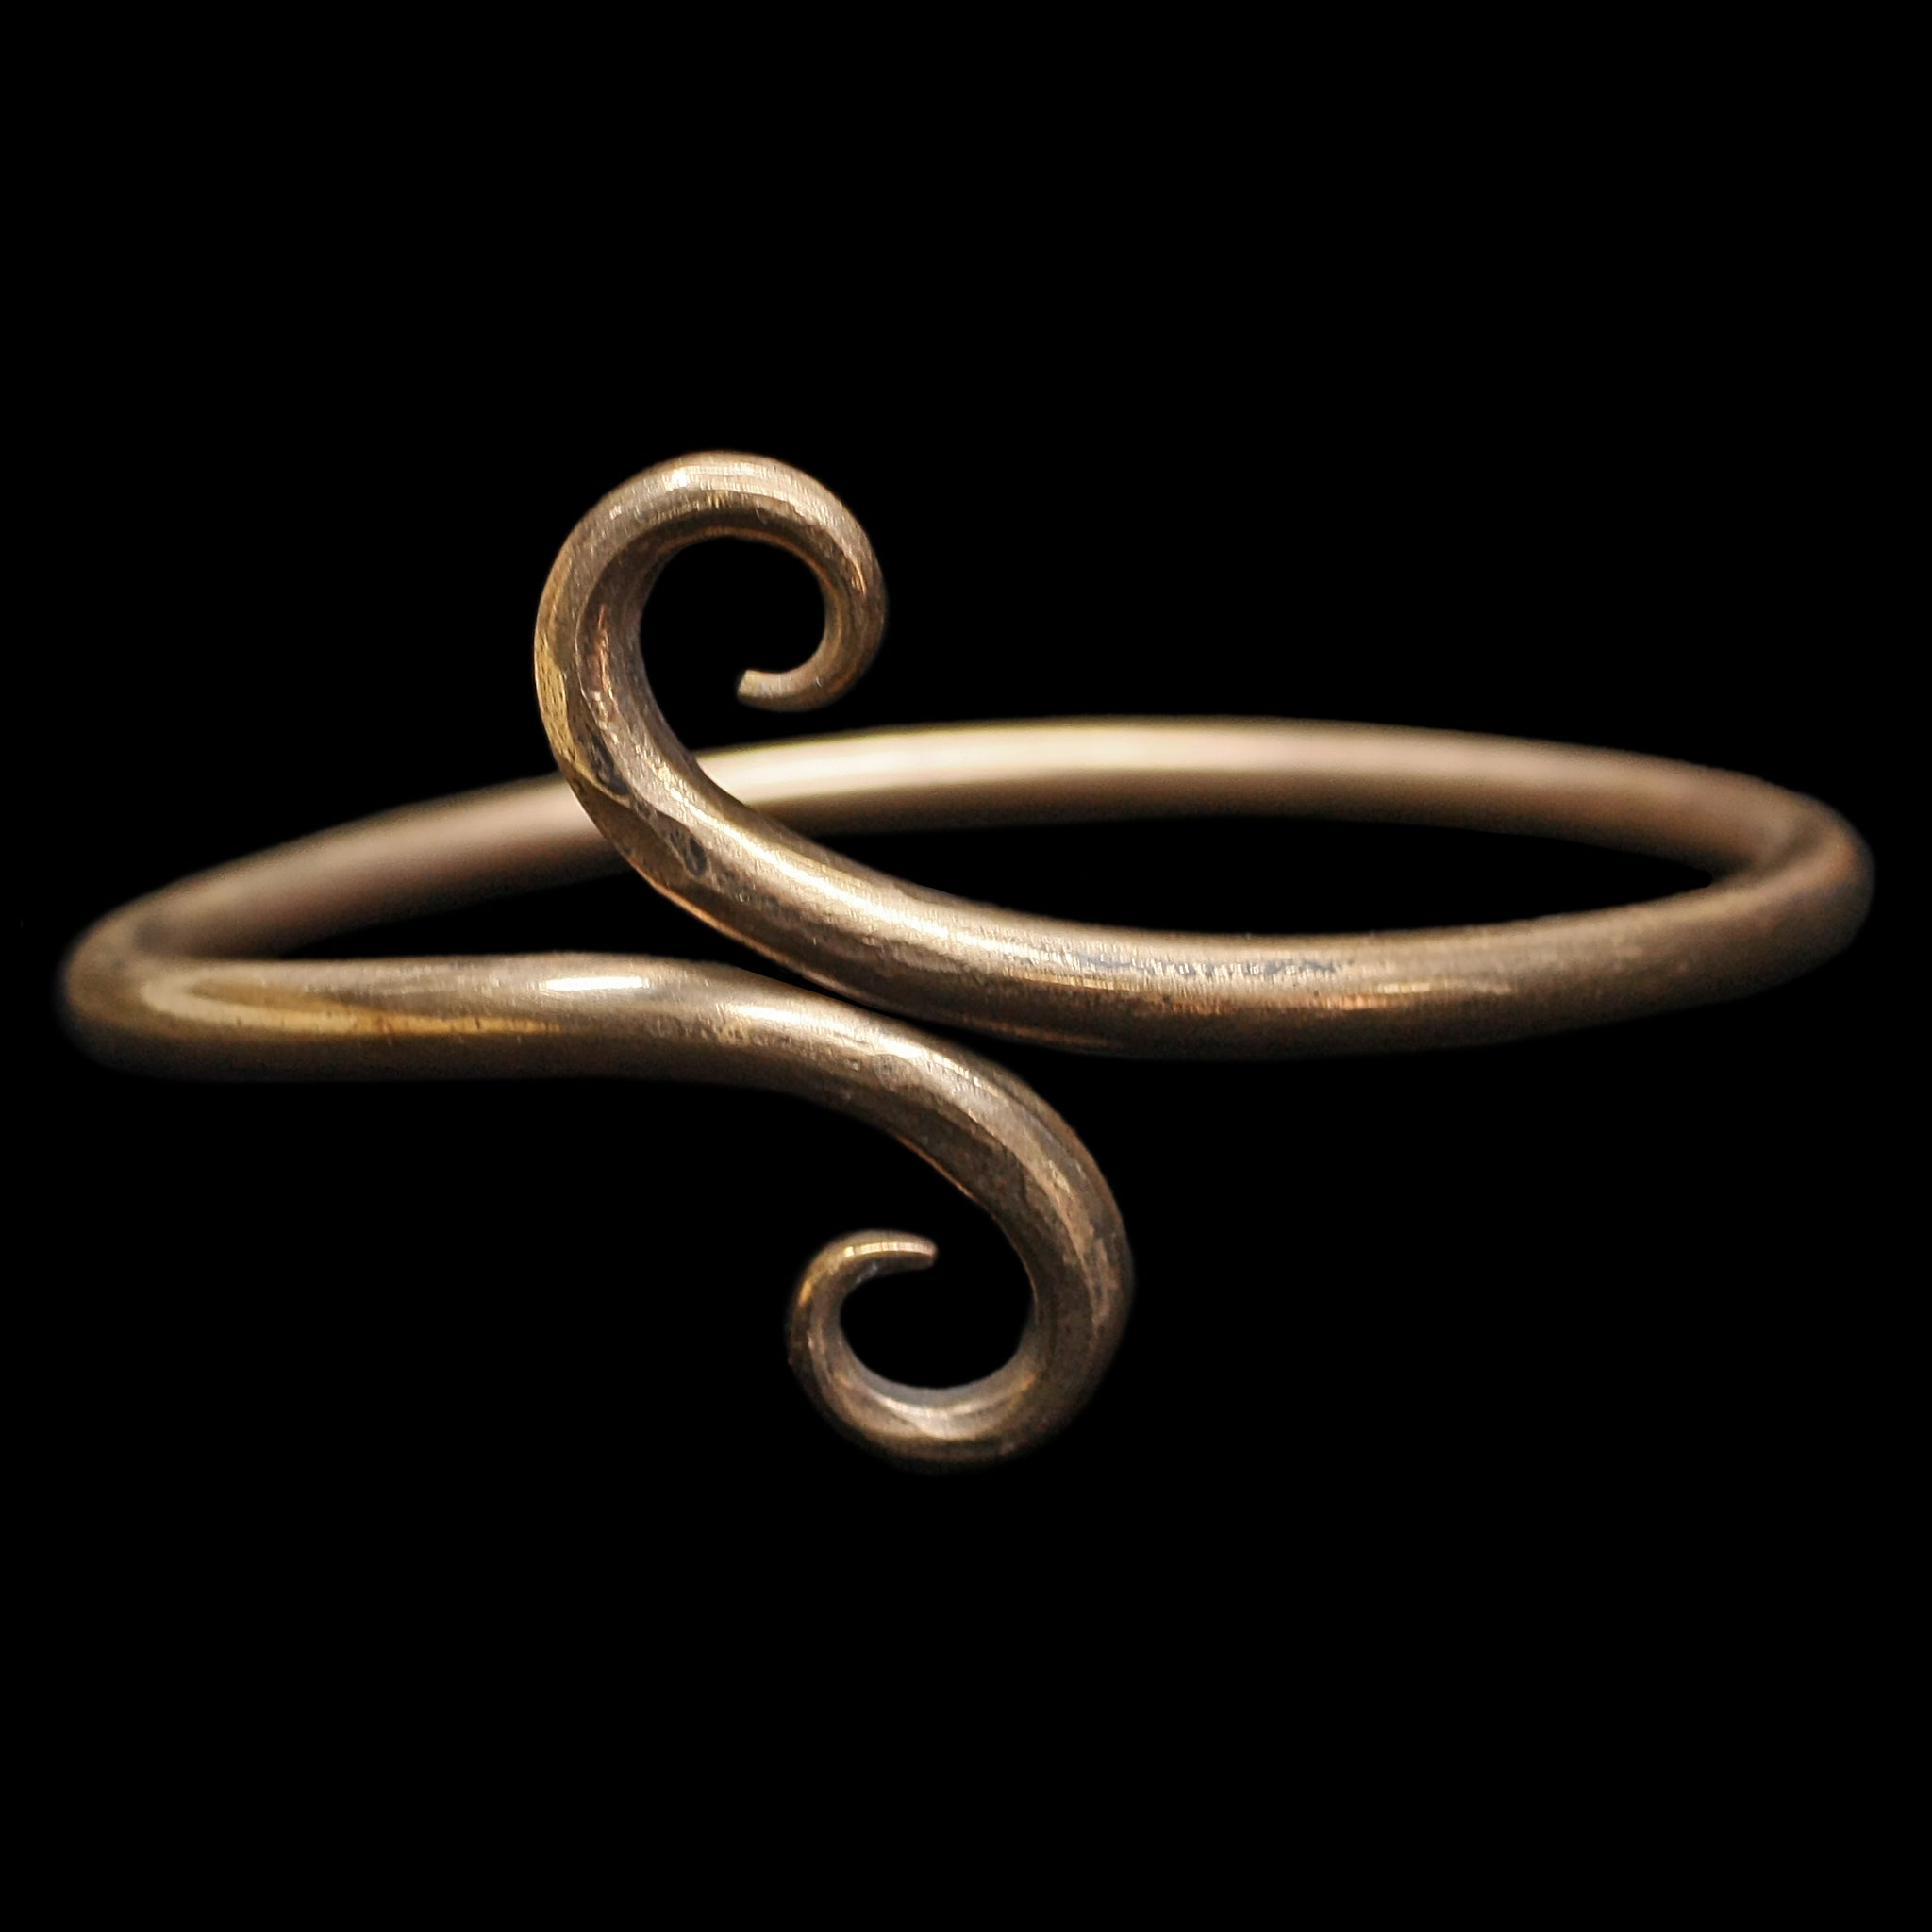 Replica Viking Arm Ring / Arm Band / Torc in Solid Bronze